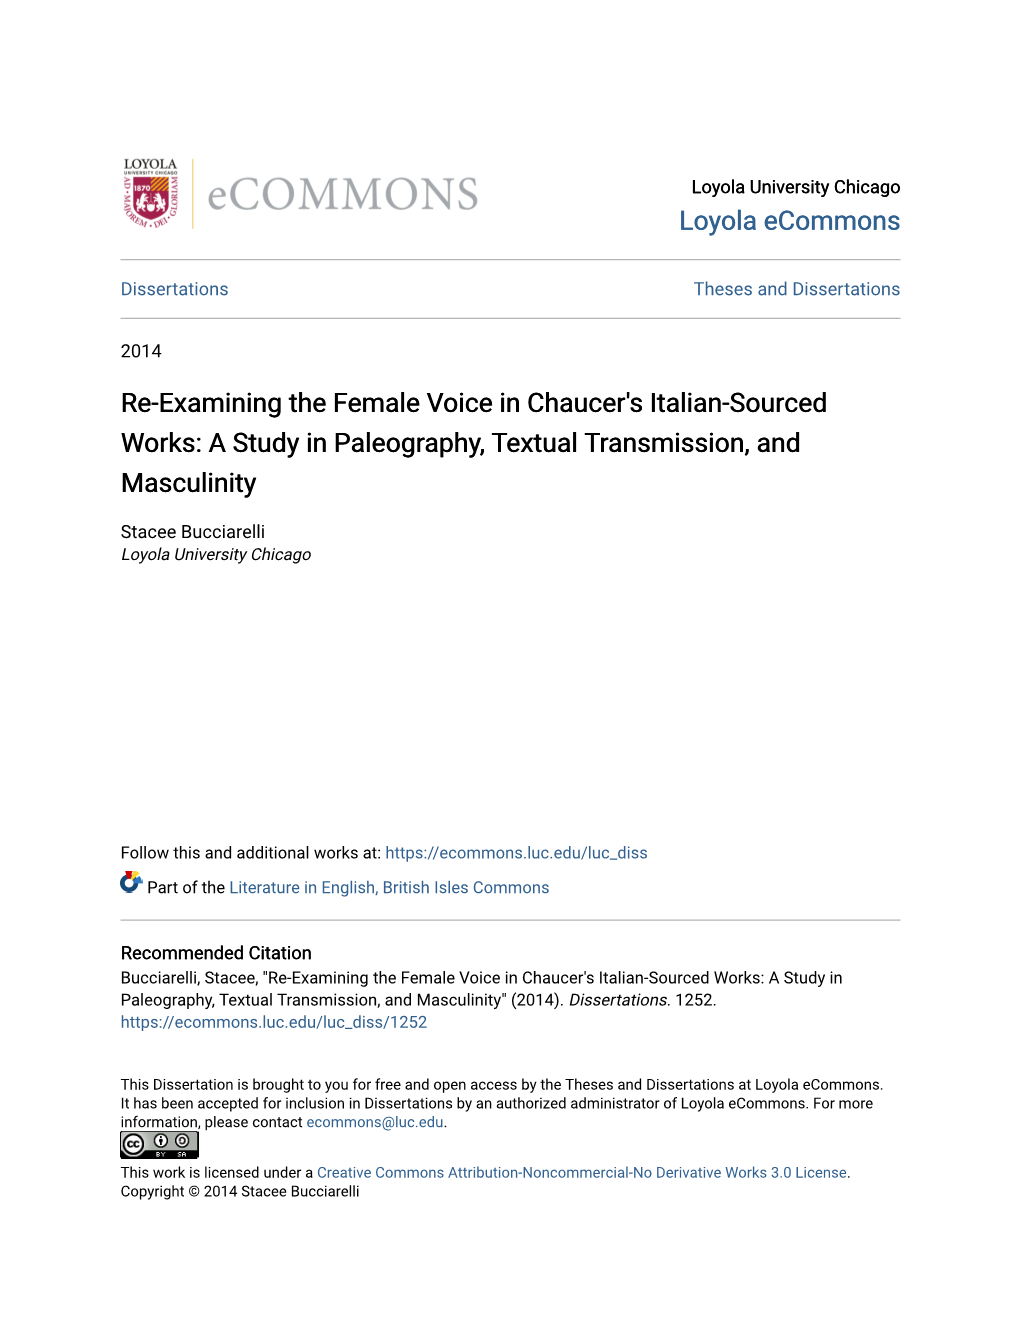 Re-Examining the Female Voice in Chaucer's Italian-Sourced Works: a Study in Paleography, Textual Transmission, and Masculinity